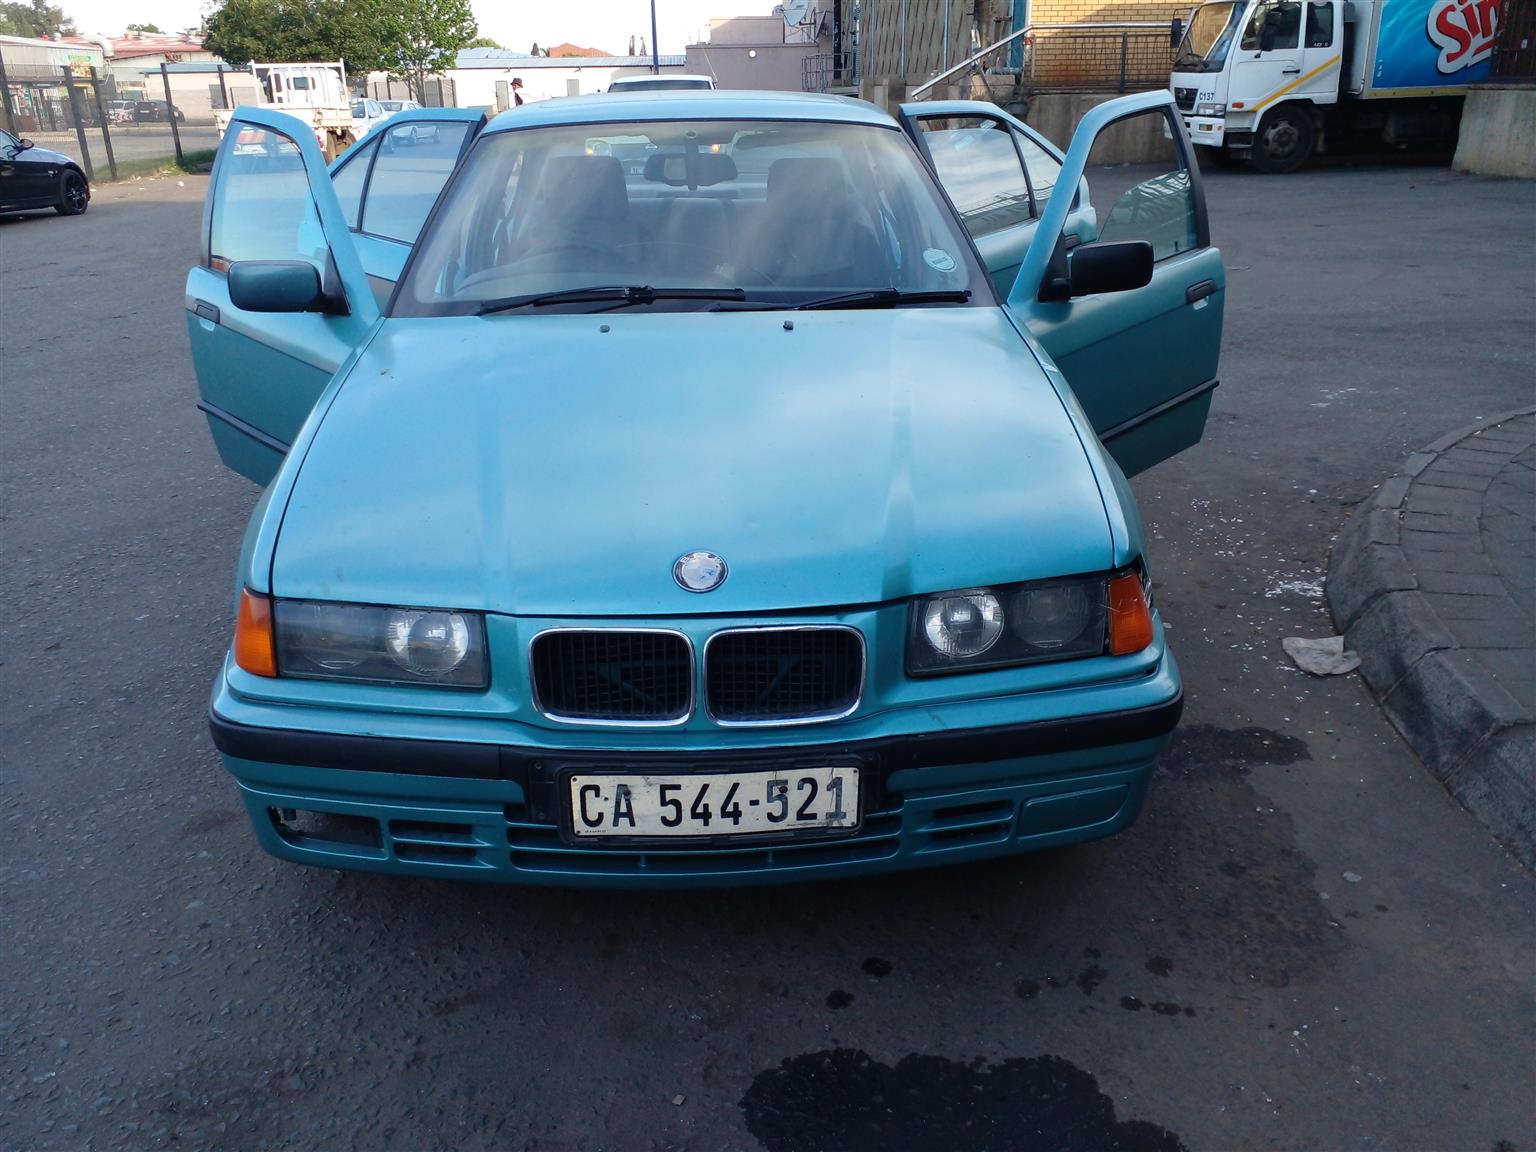 1996 BMW 3 Series Sedan  Tow bar   Recently painted   Manual  316i very light on